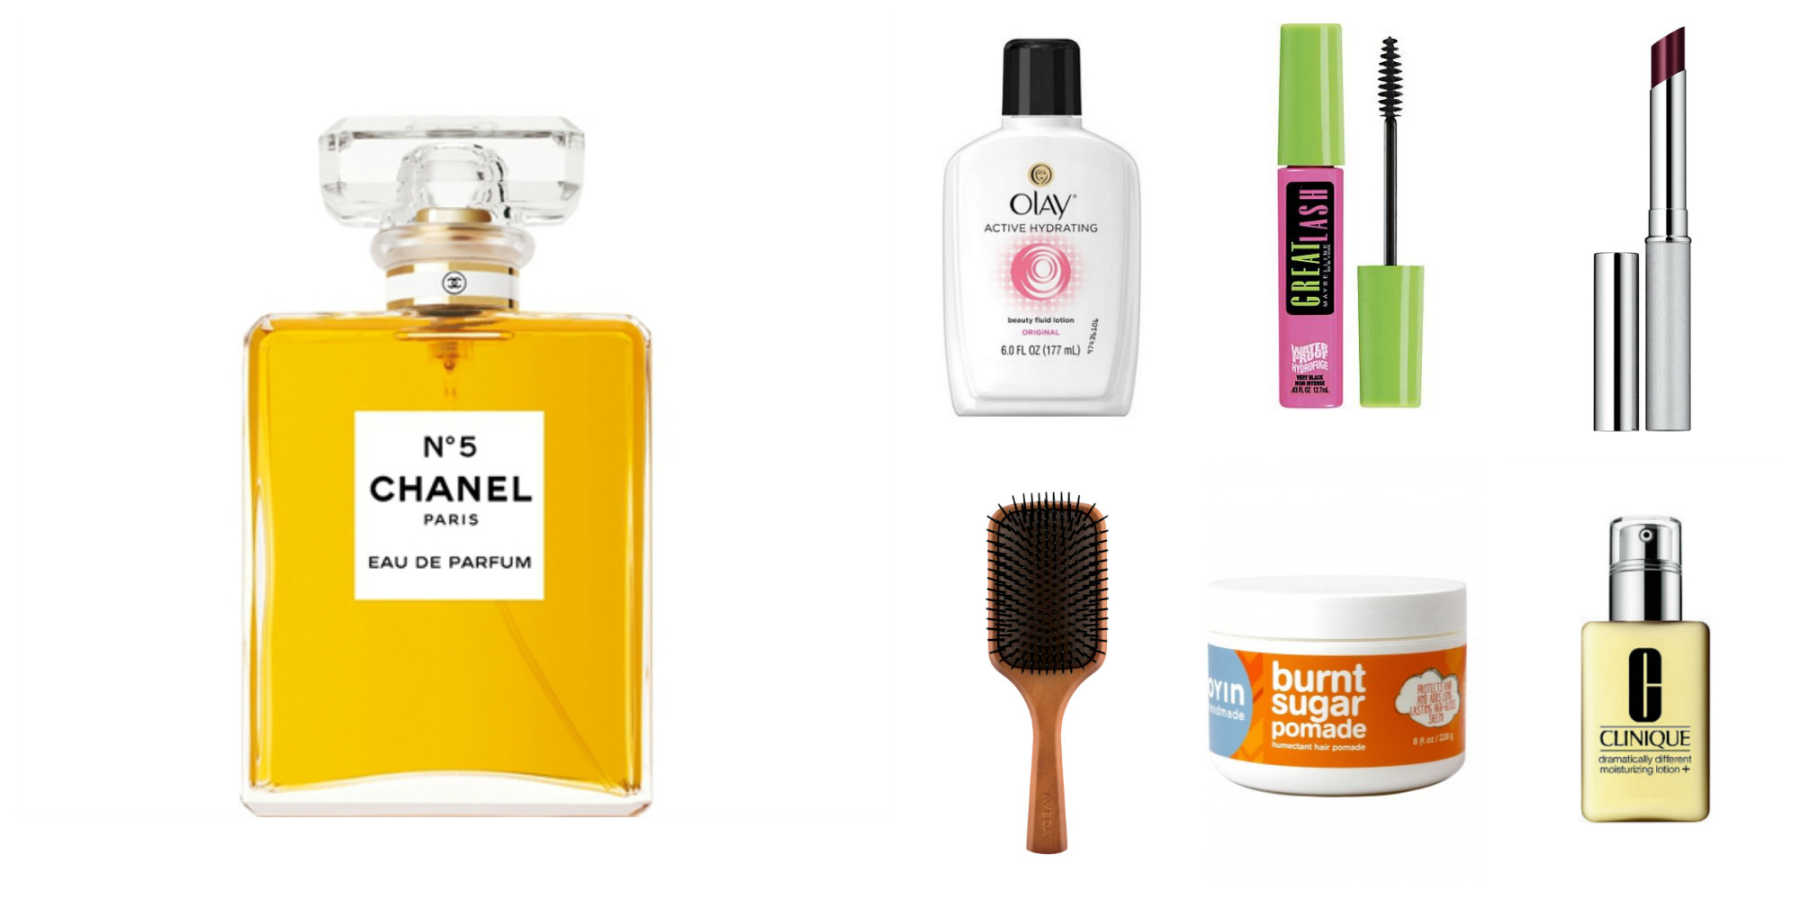 14 Women Share Tried & True Beauty Products They've Loved 10+ Years ...